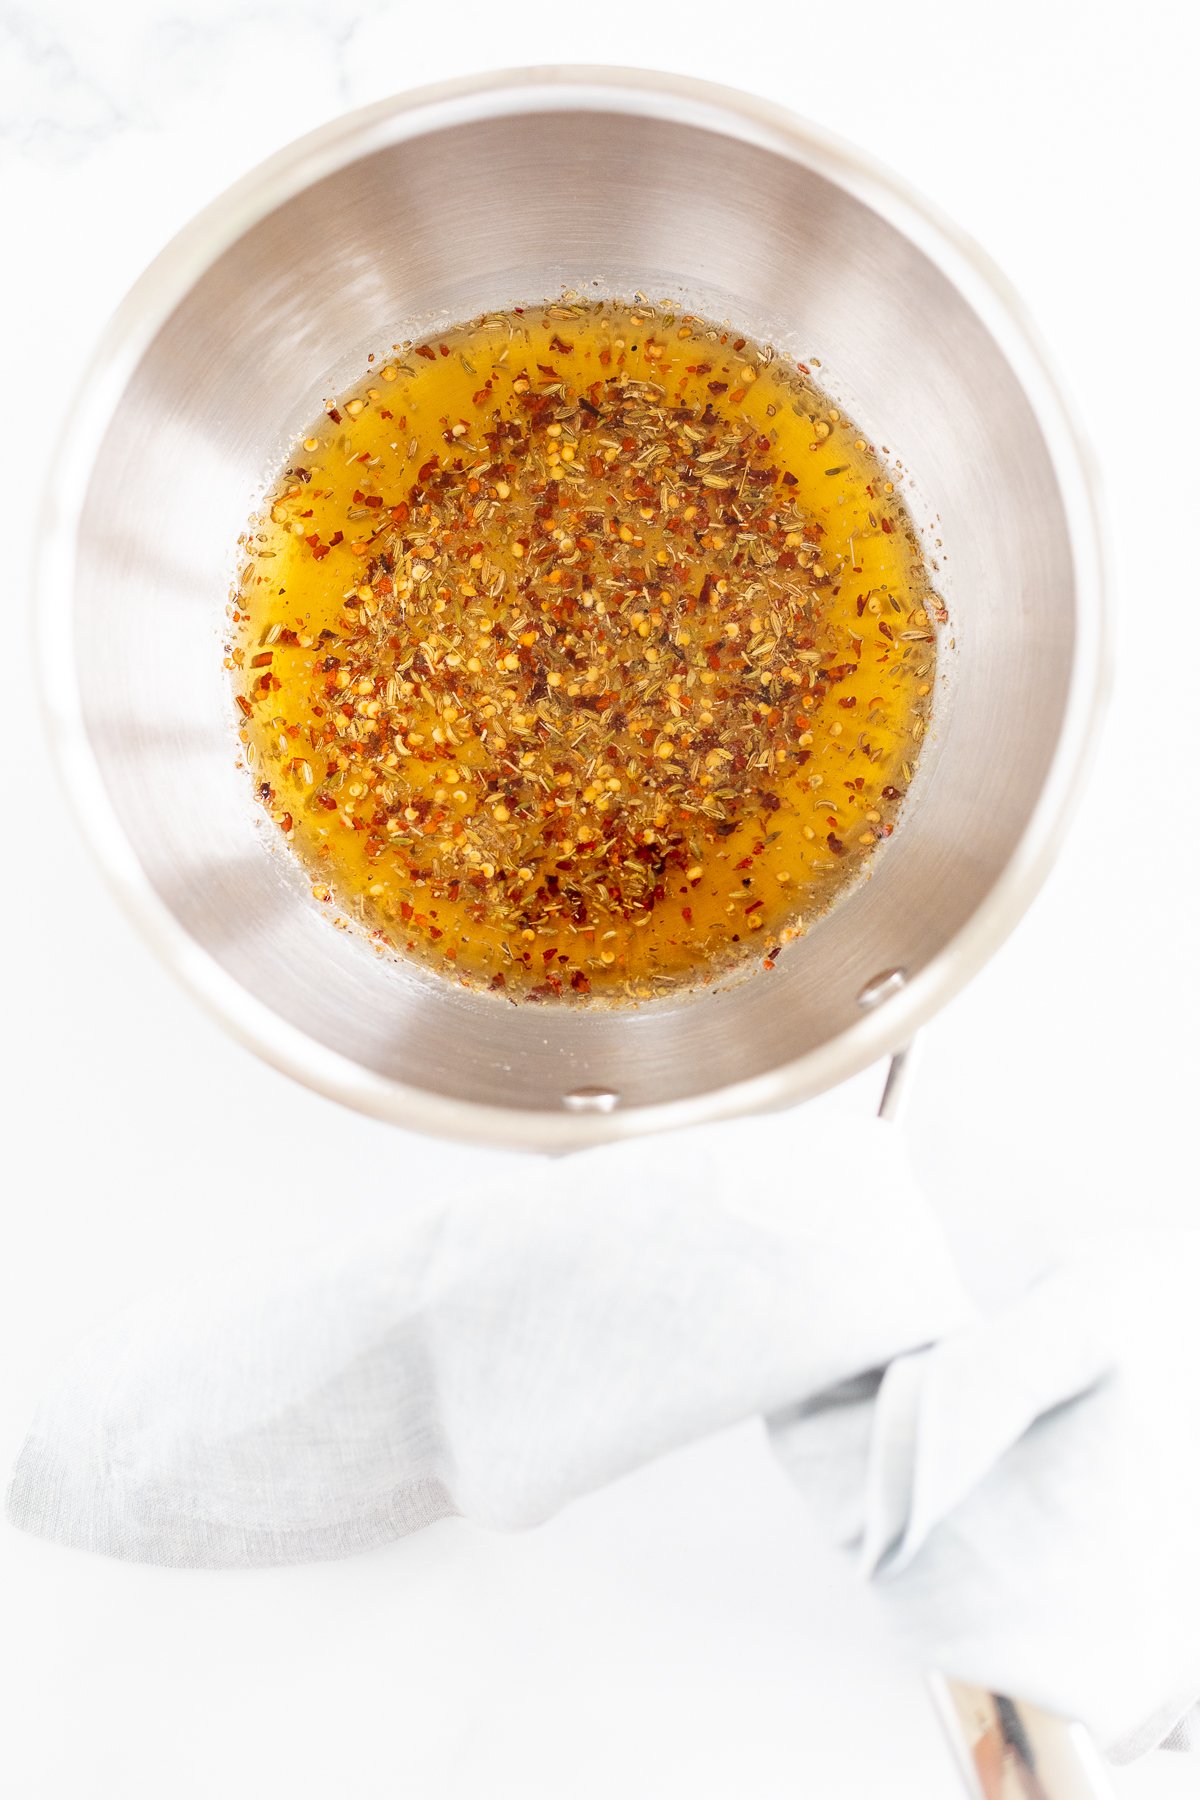 A pan filled with spices and honey on a white surface.